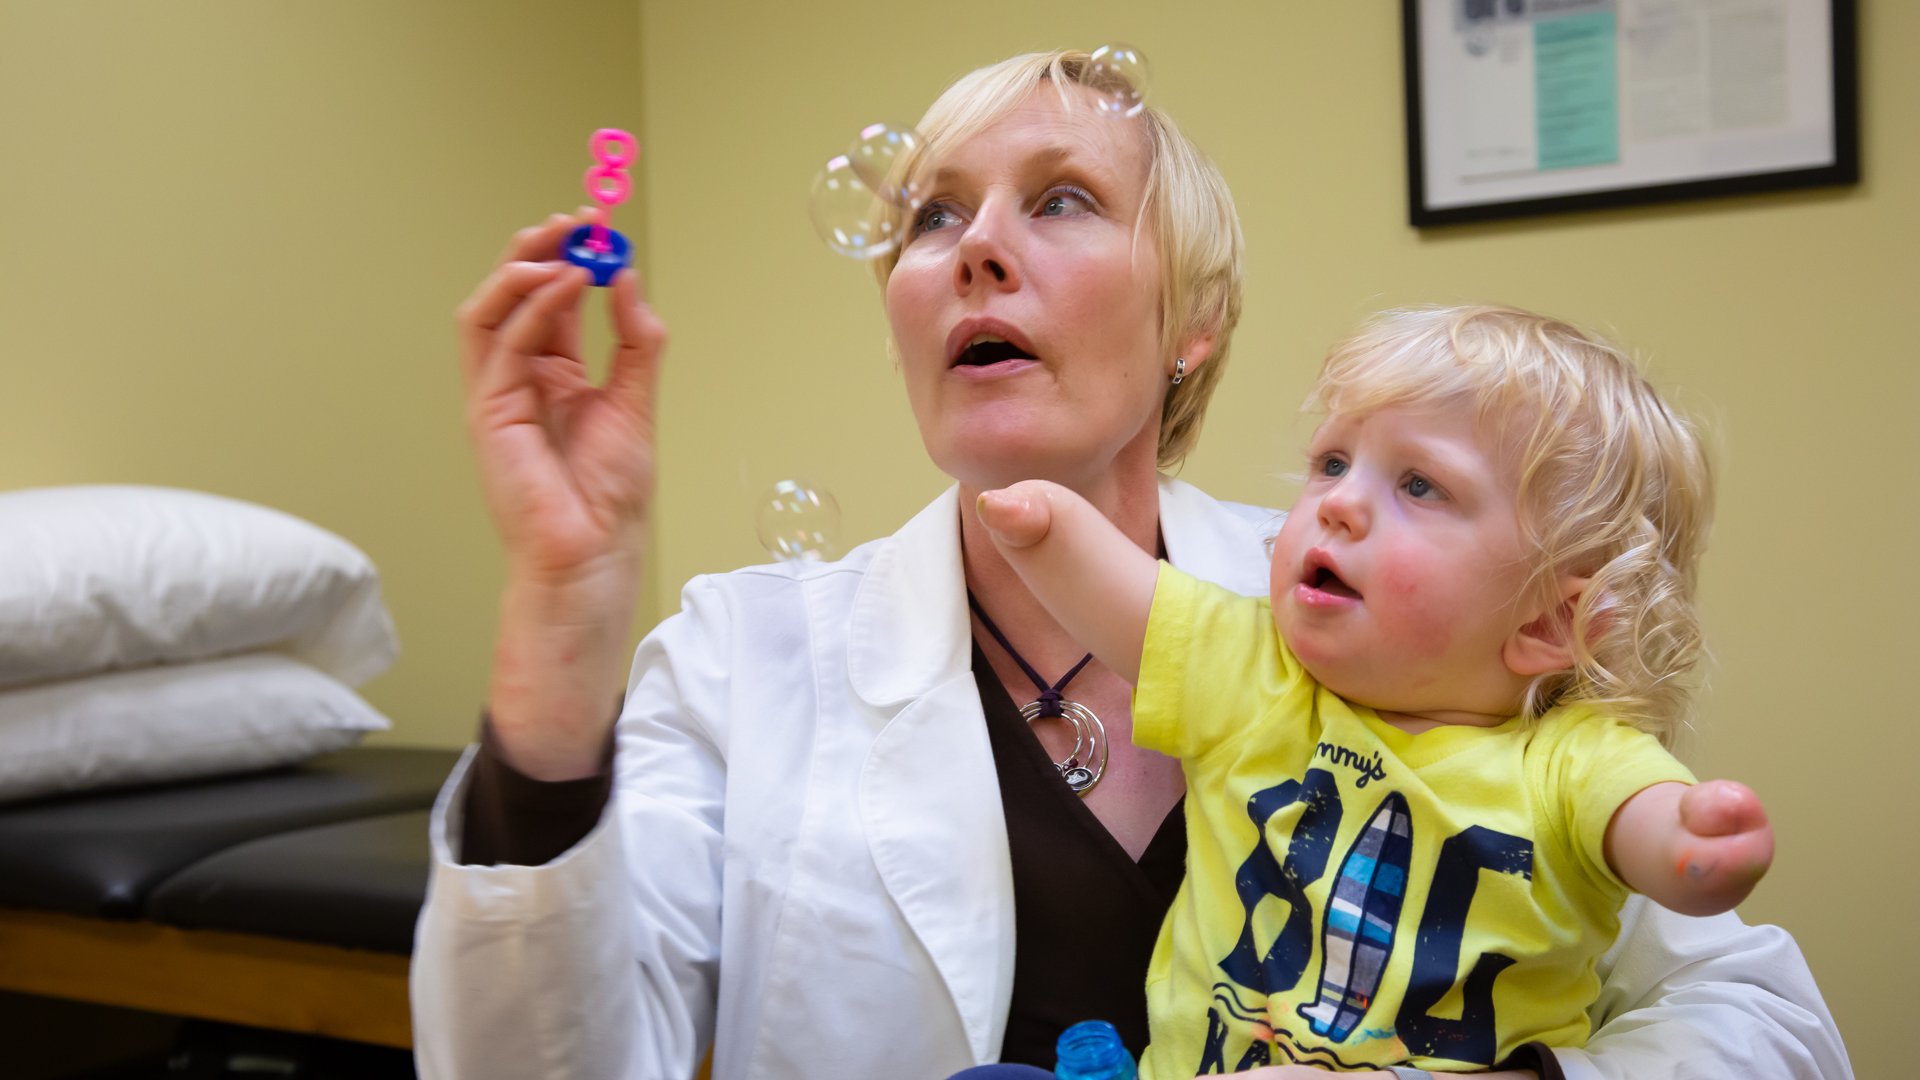 A clinical therapy specialist works with a pediatric patient